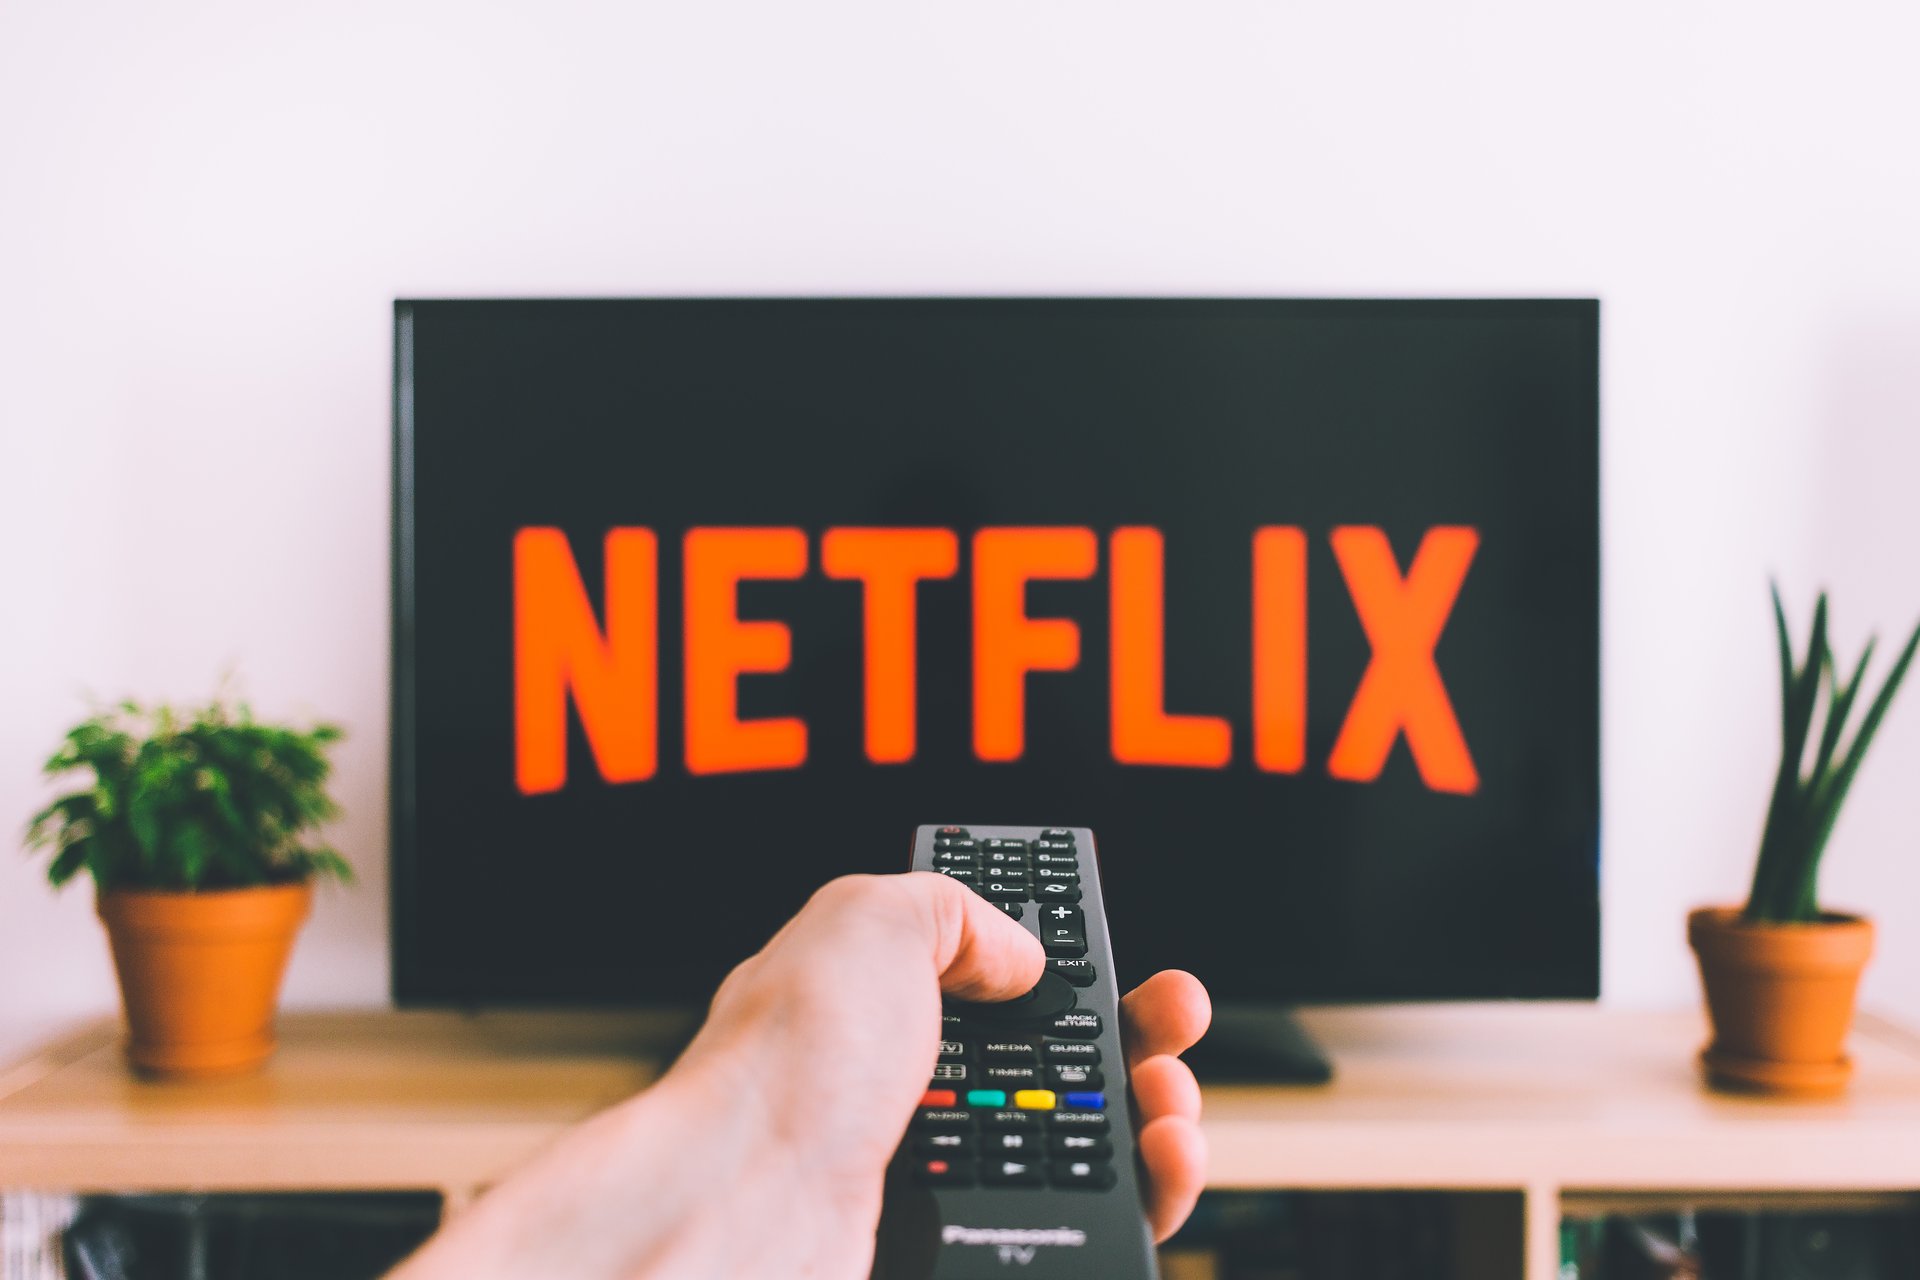 If you no longer know what to watch on Netflix, here is the trick to unlock hidden titles